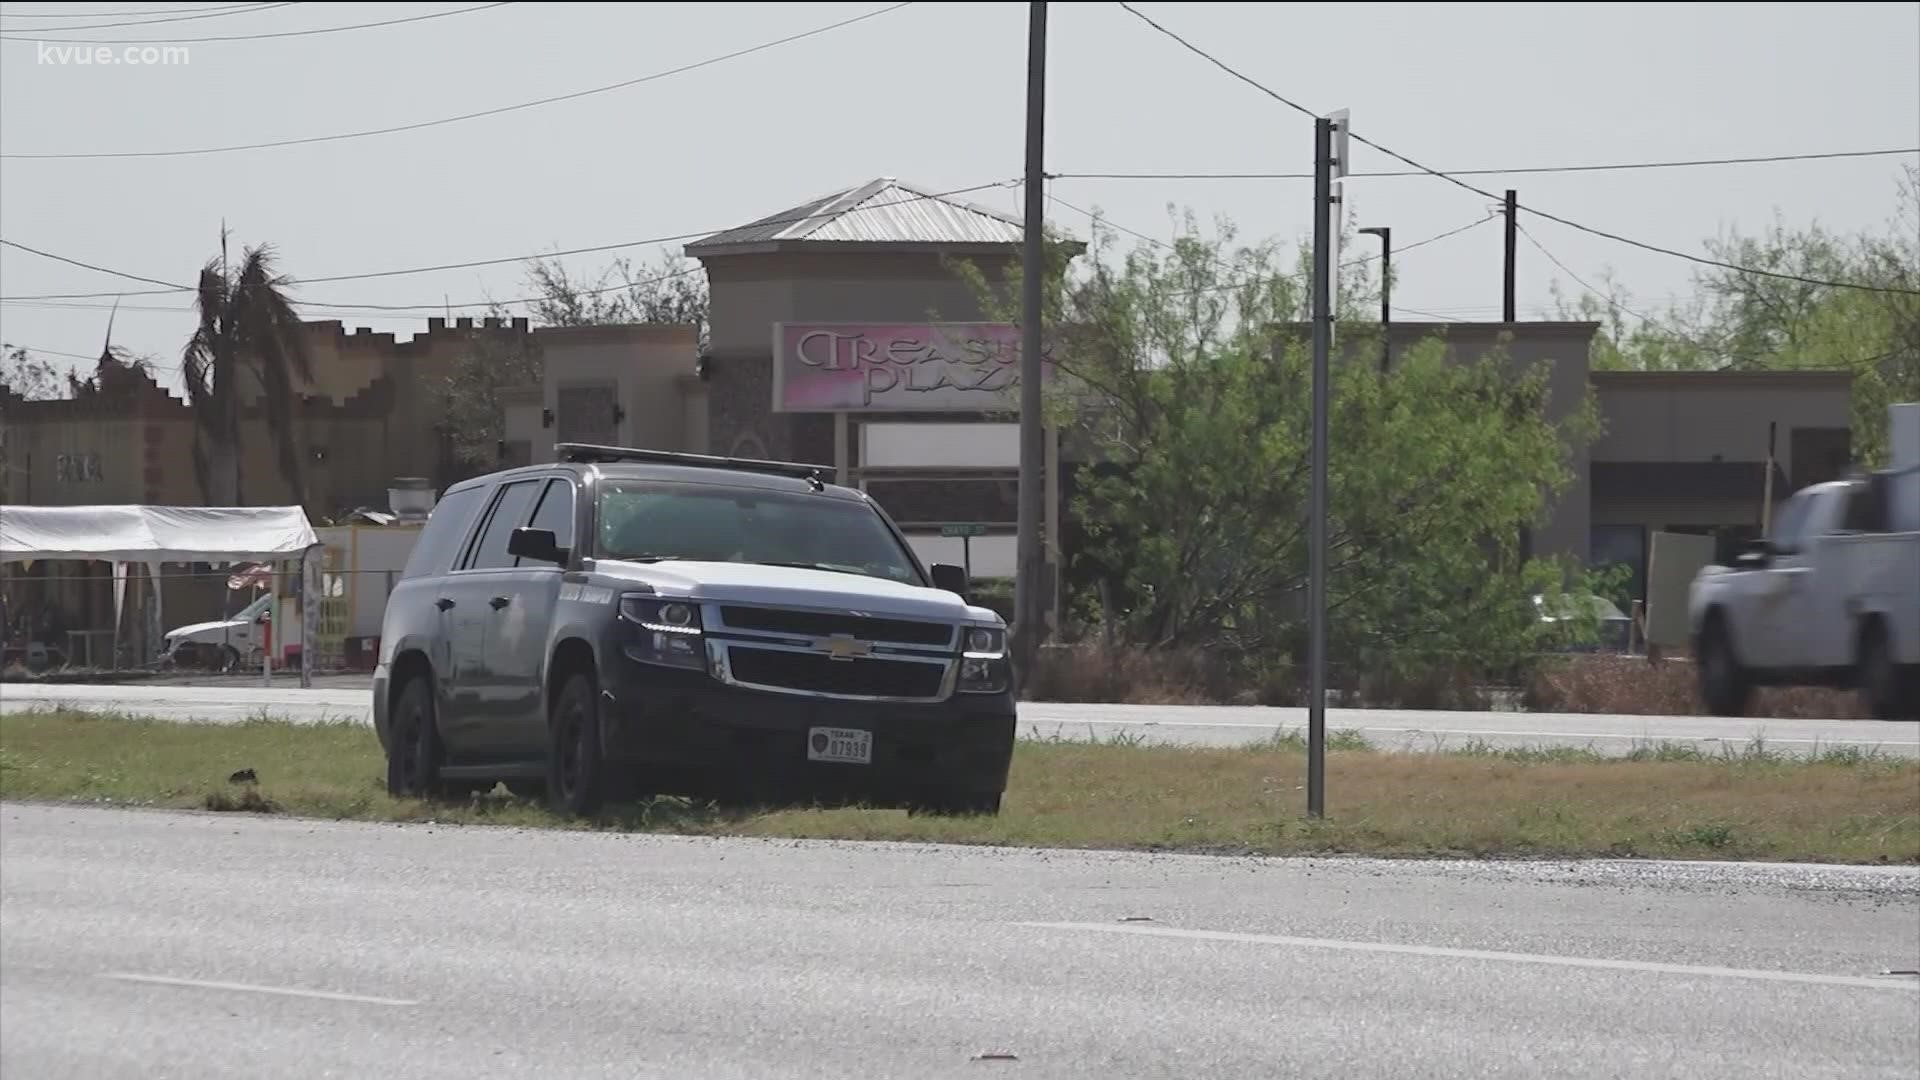 Under the Texas operation, DPS troopers can arrest migrants for trespassing if they’re on private or State property.